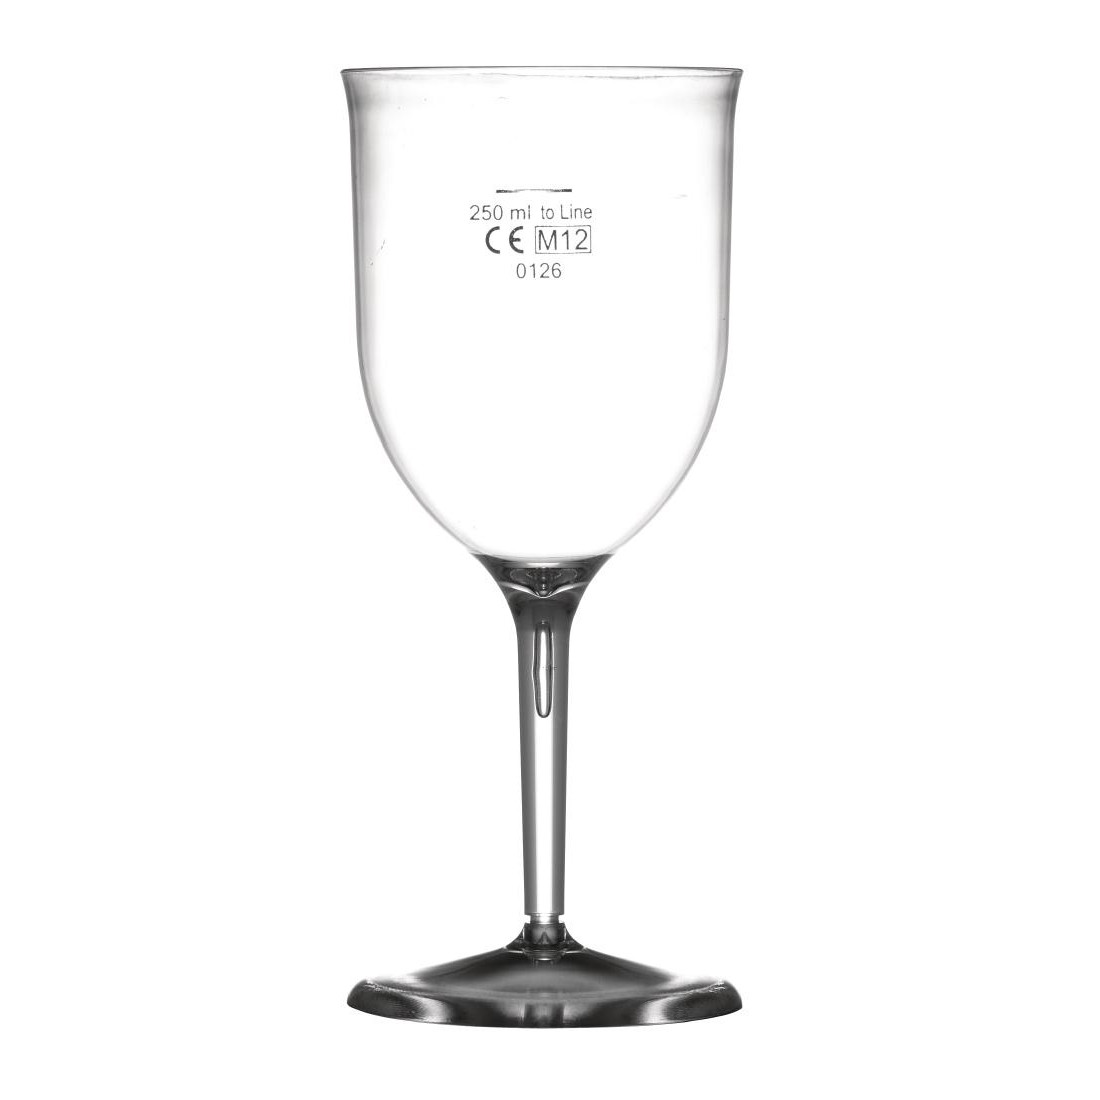 Polystyrene Wine Glasses 340ml Ce Marked At 250ml Polystyrene Glasses Plastics Glasses